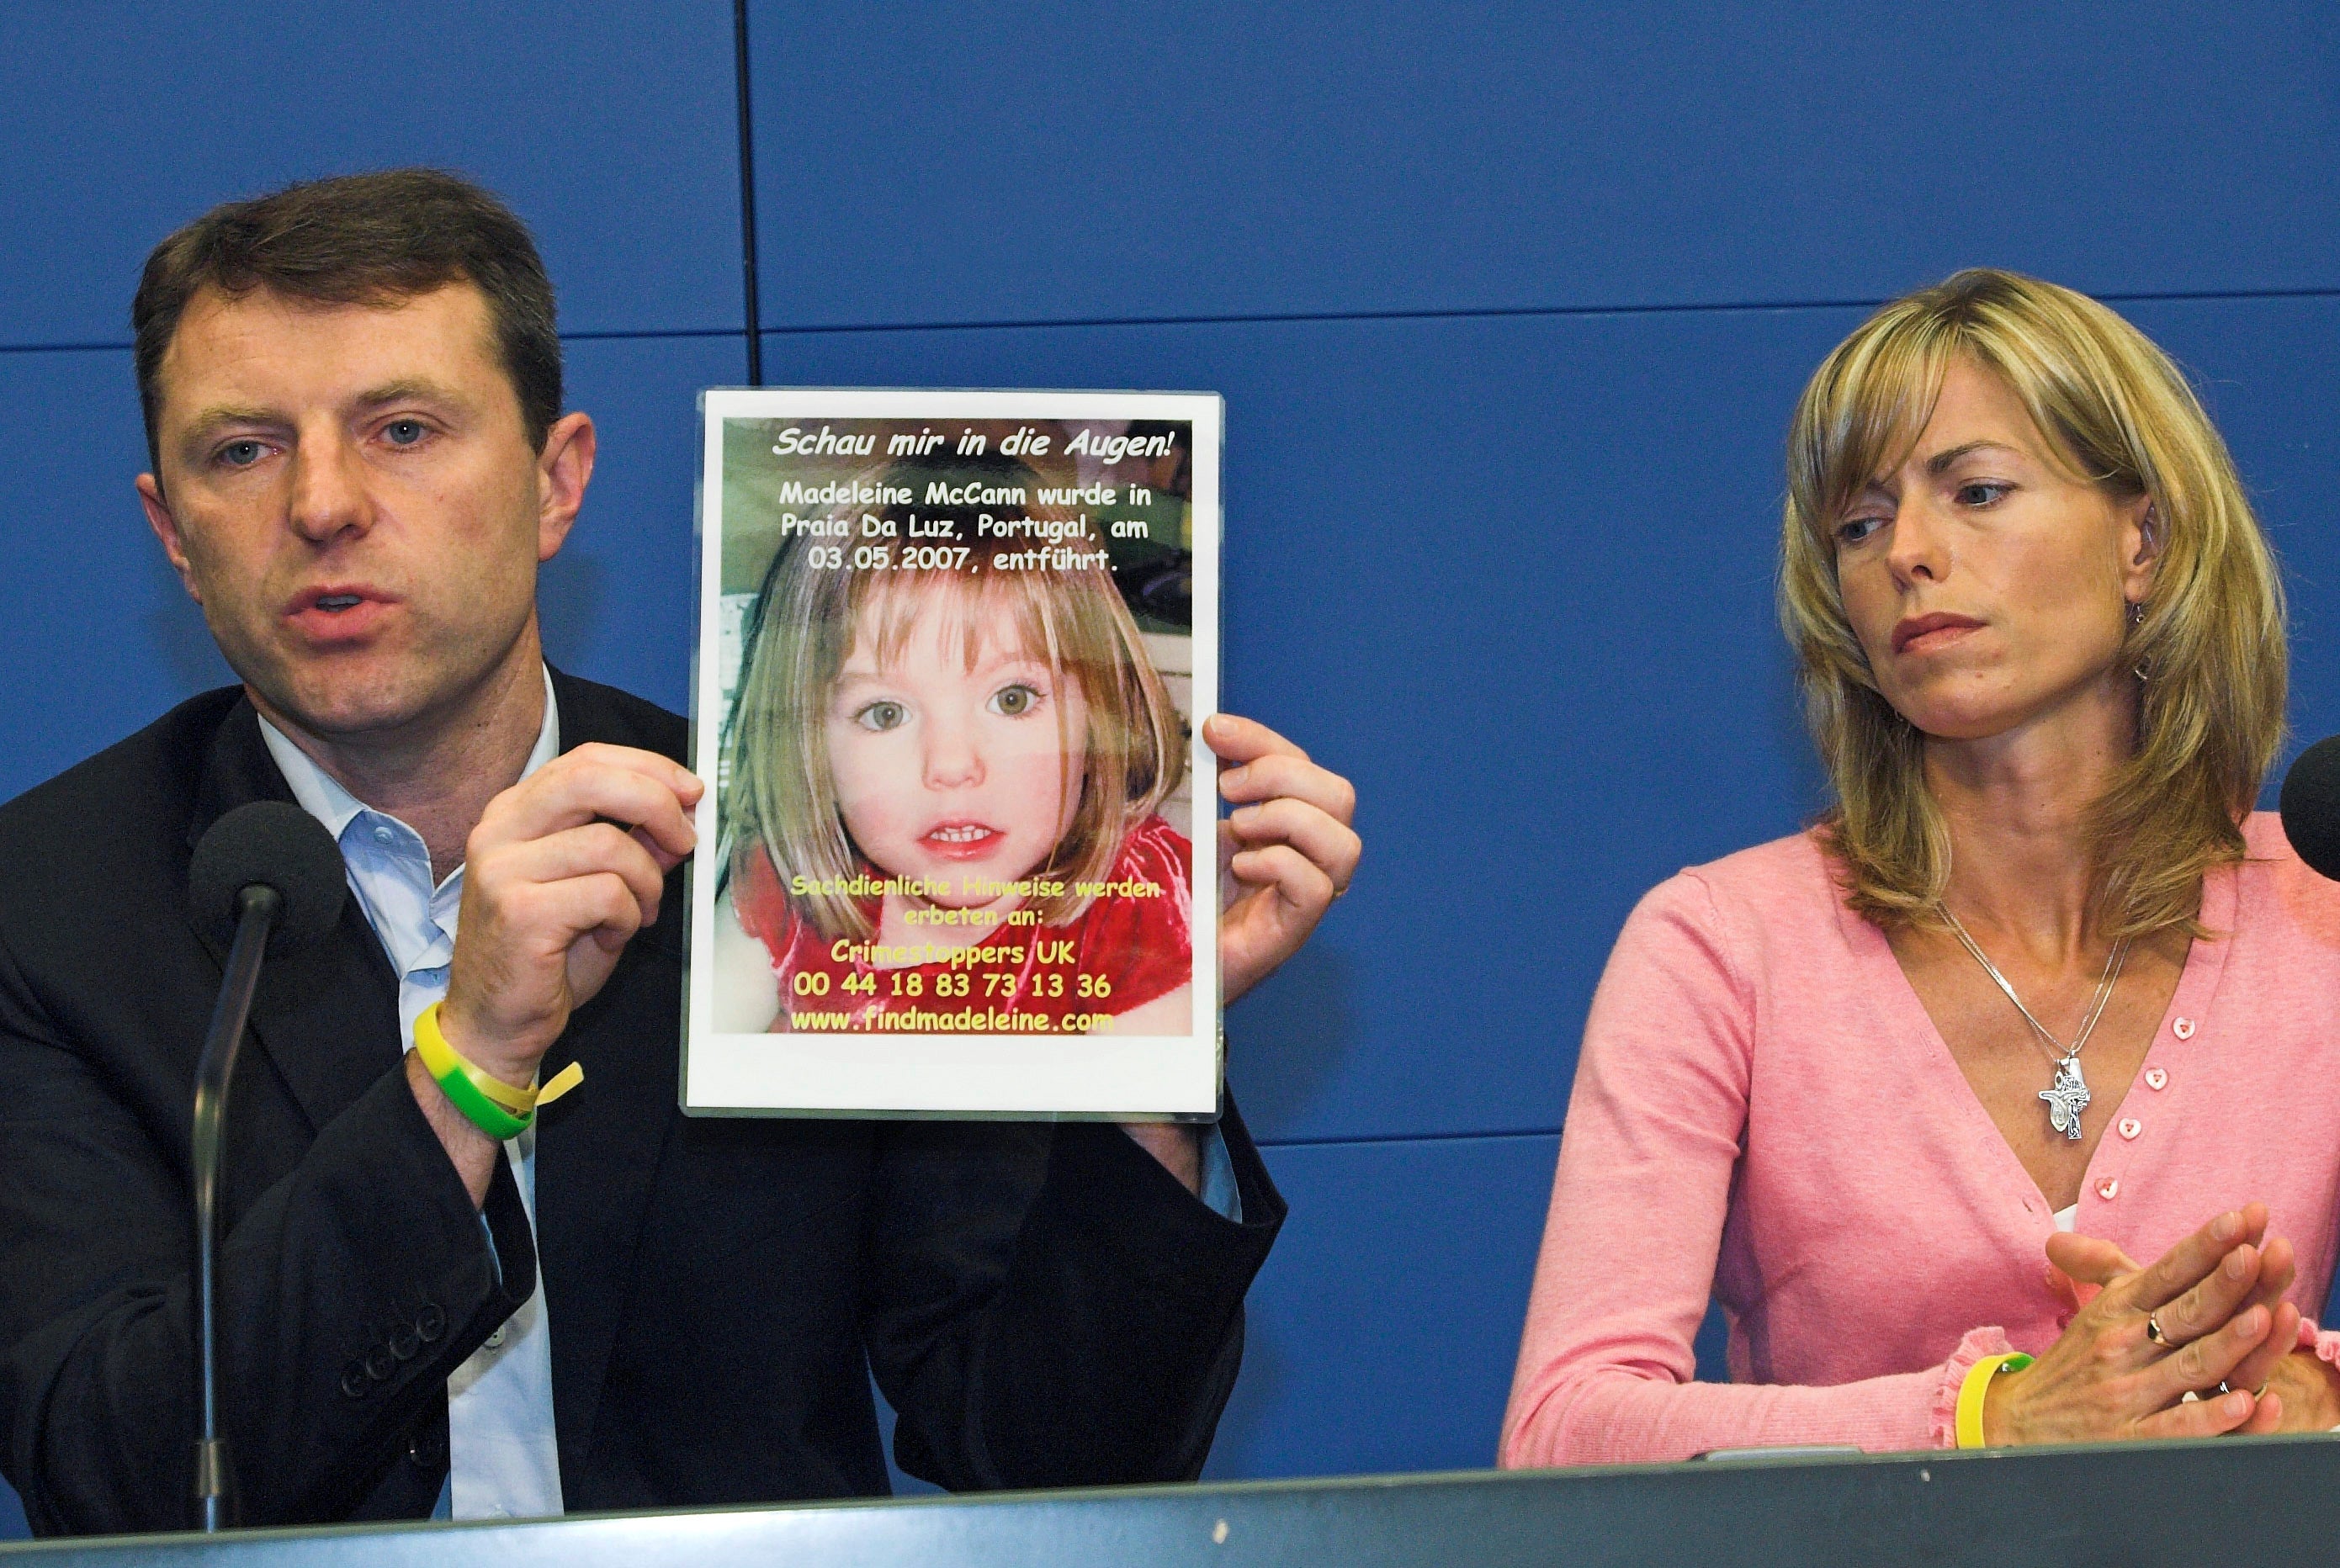 Gerry and Kate McCann, Madeleine’s parents, are still looking for answers